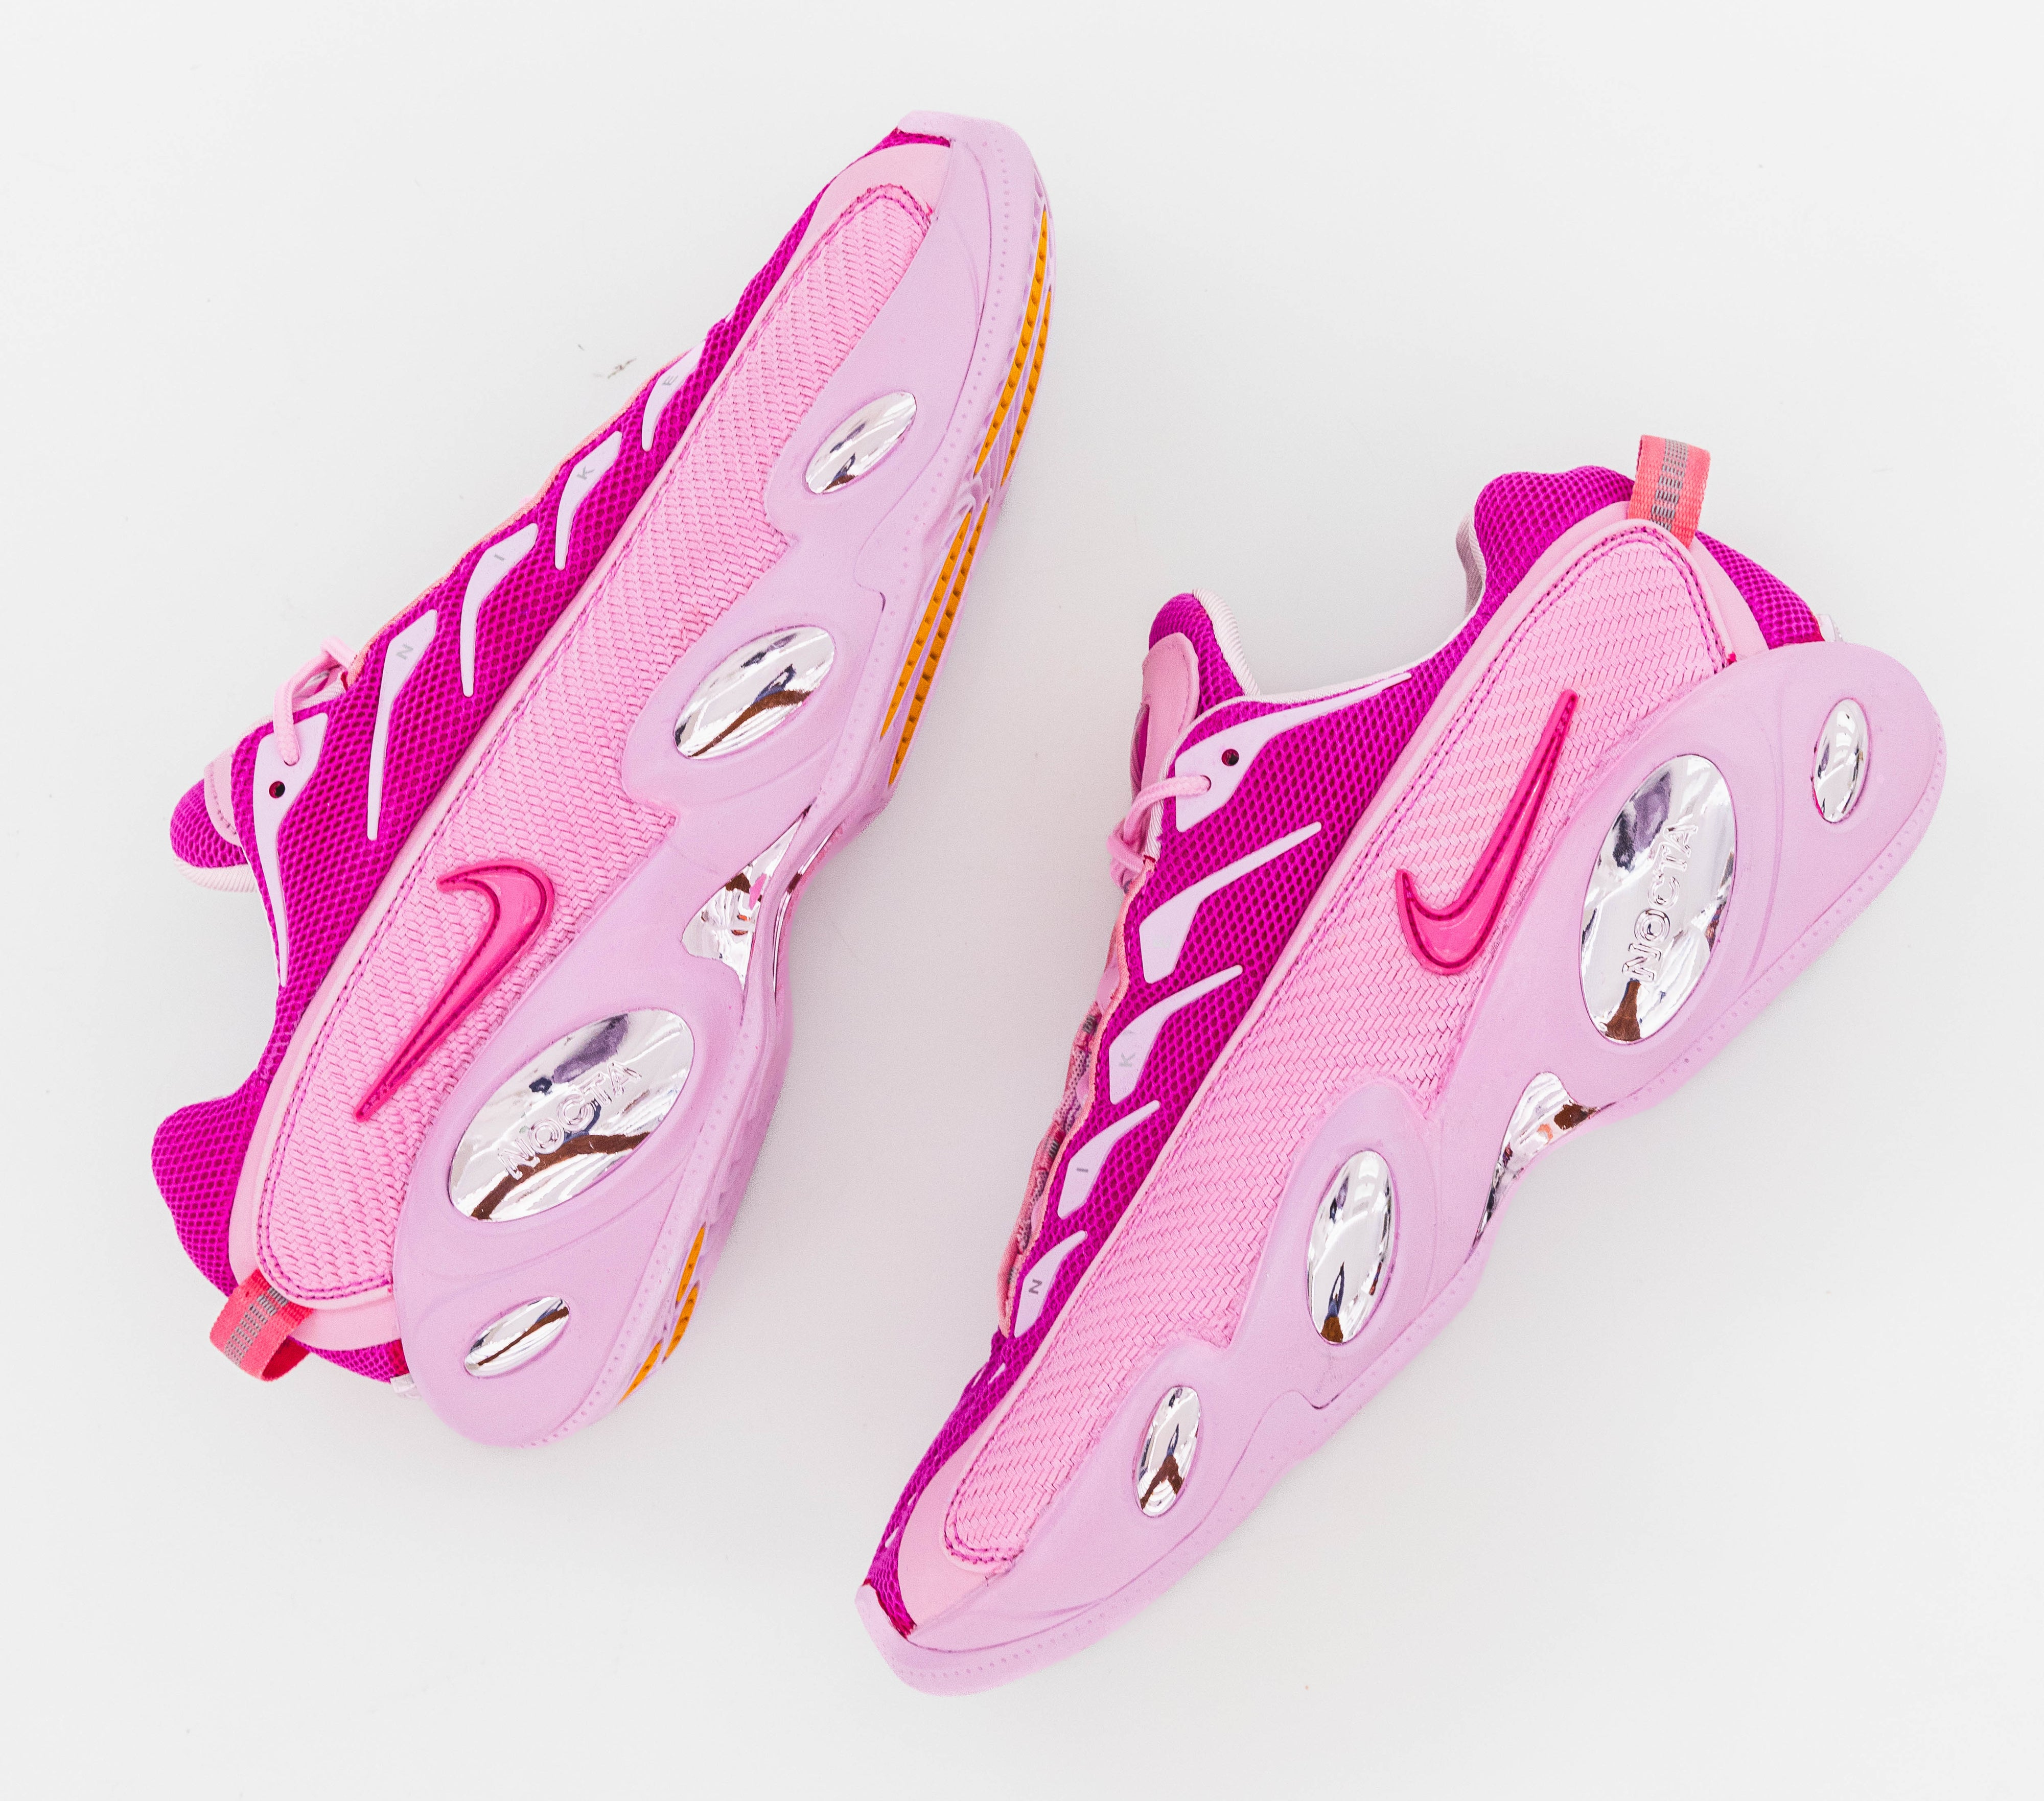 Drake x Nike NOCTA Glide Pink by The Surgeon Sole